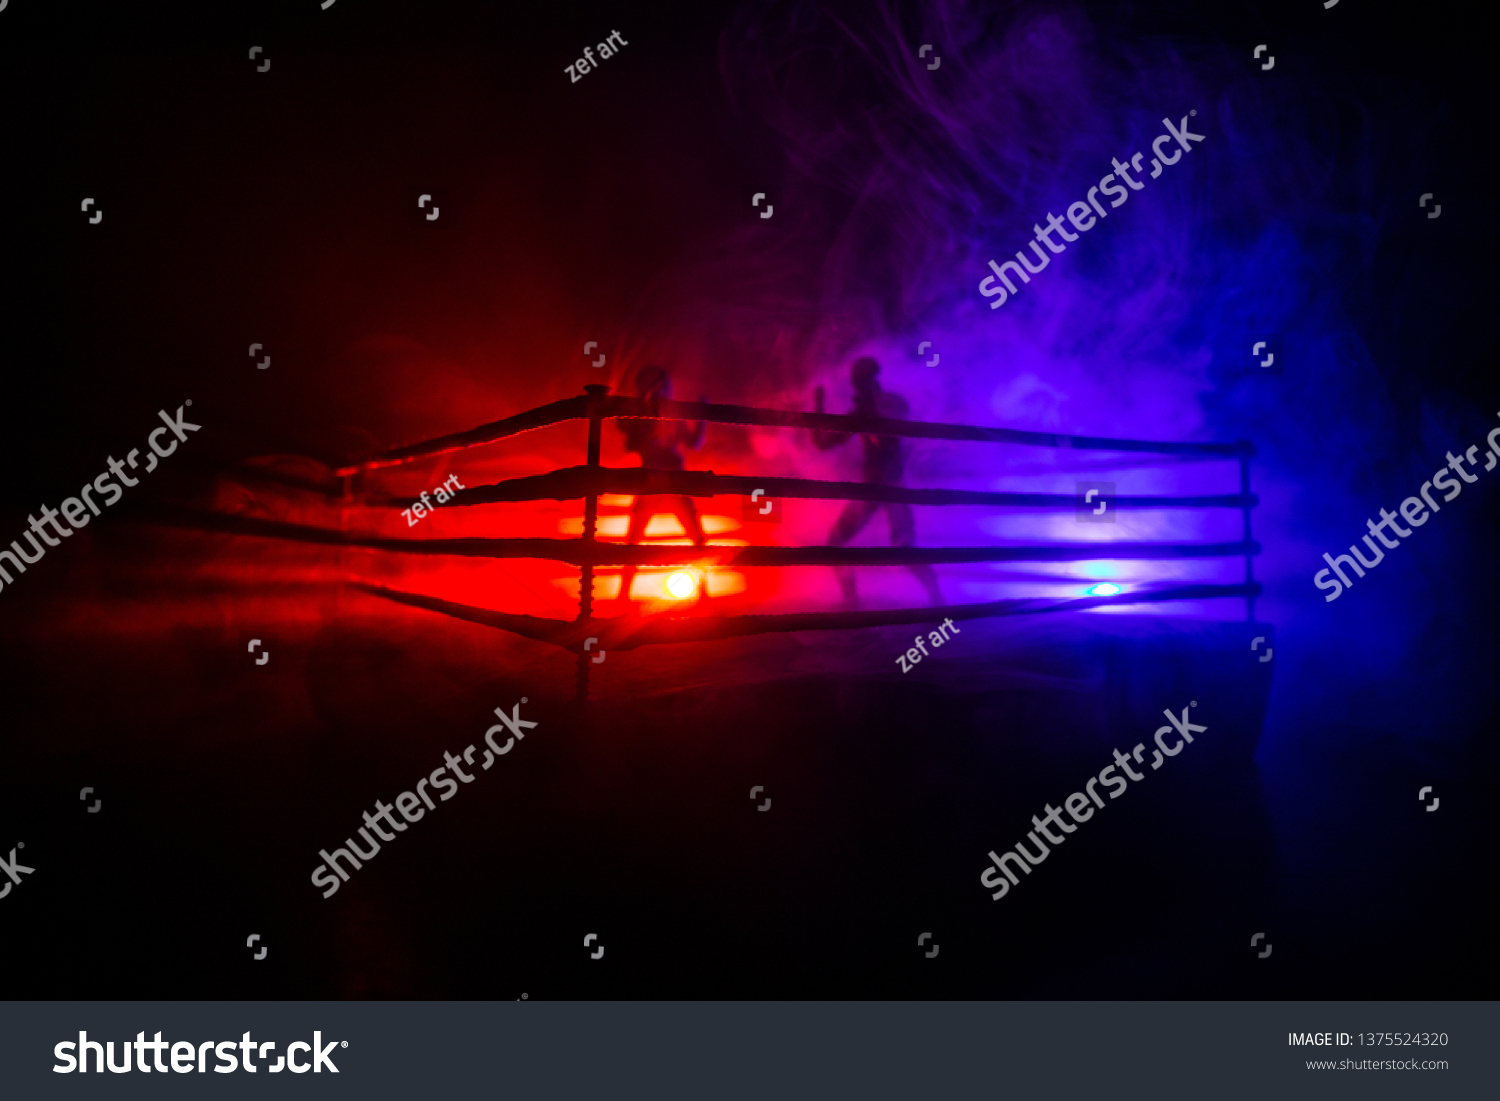 Man and woman boxing on the ring. Sport concept. Artwork decoration with toys on foggy toned dark background. #1375524320